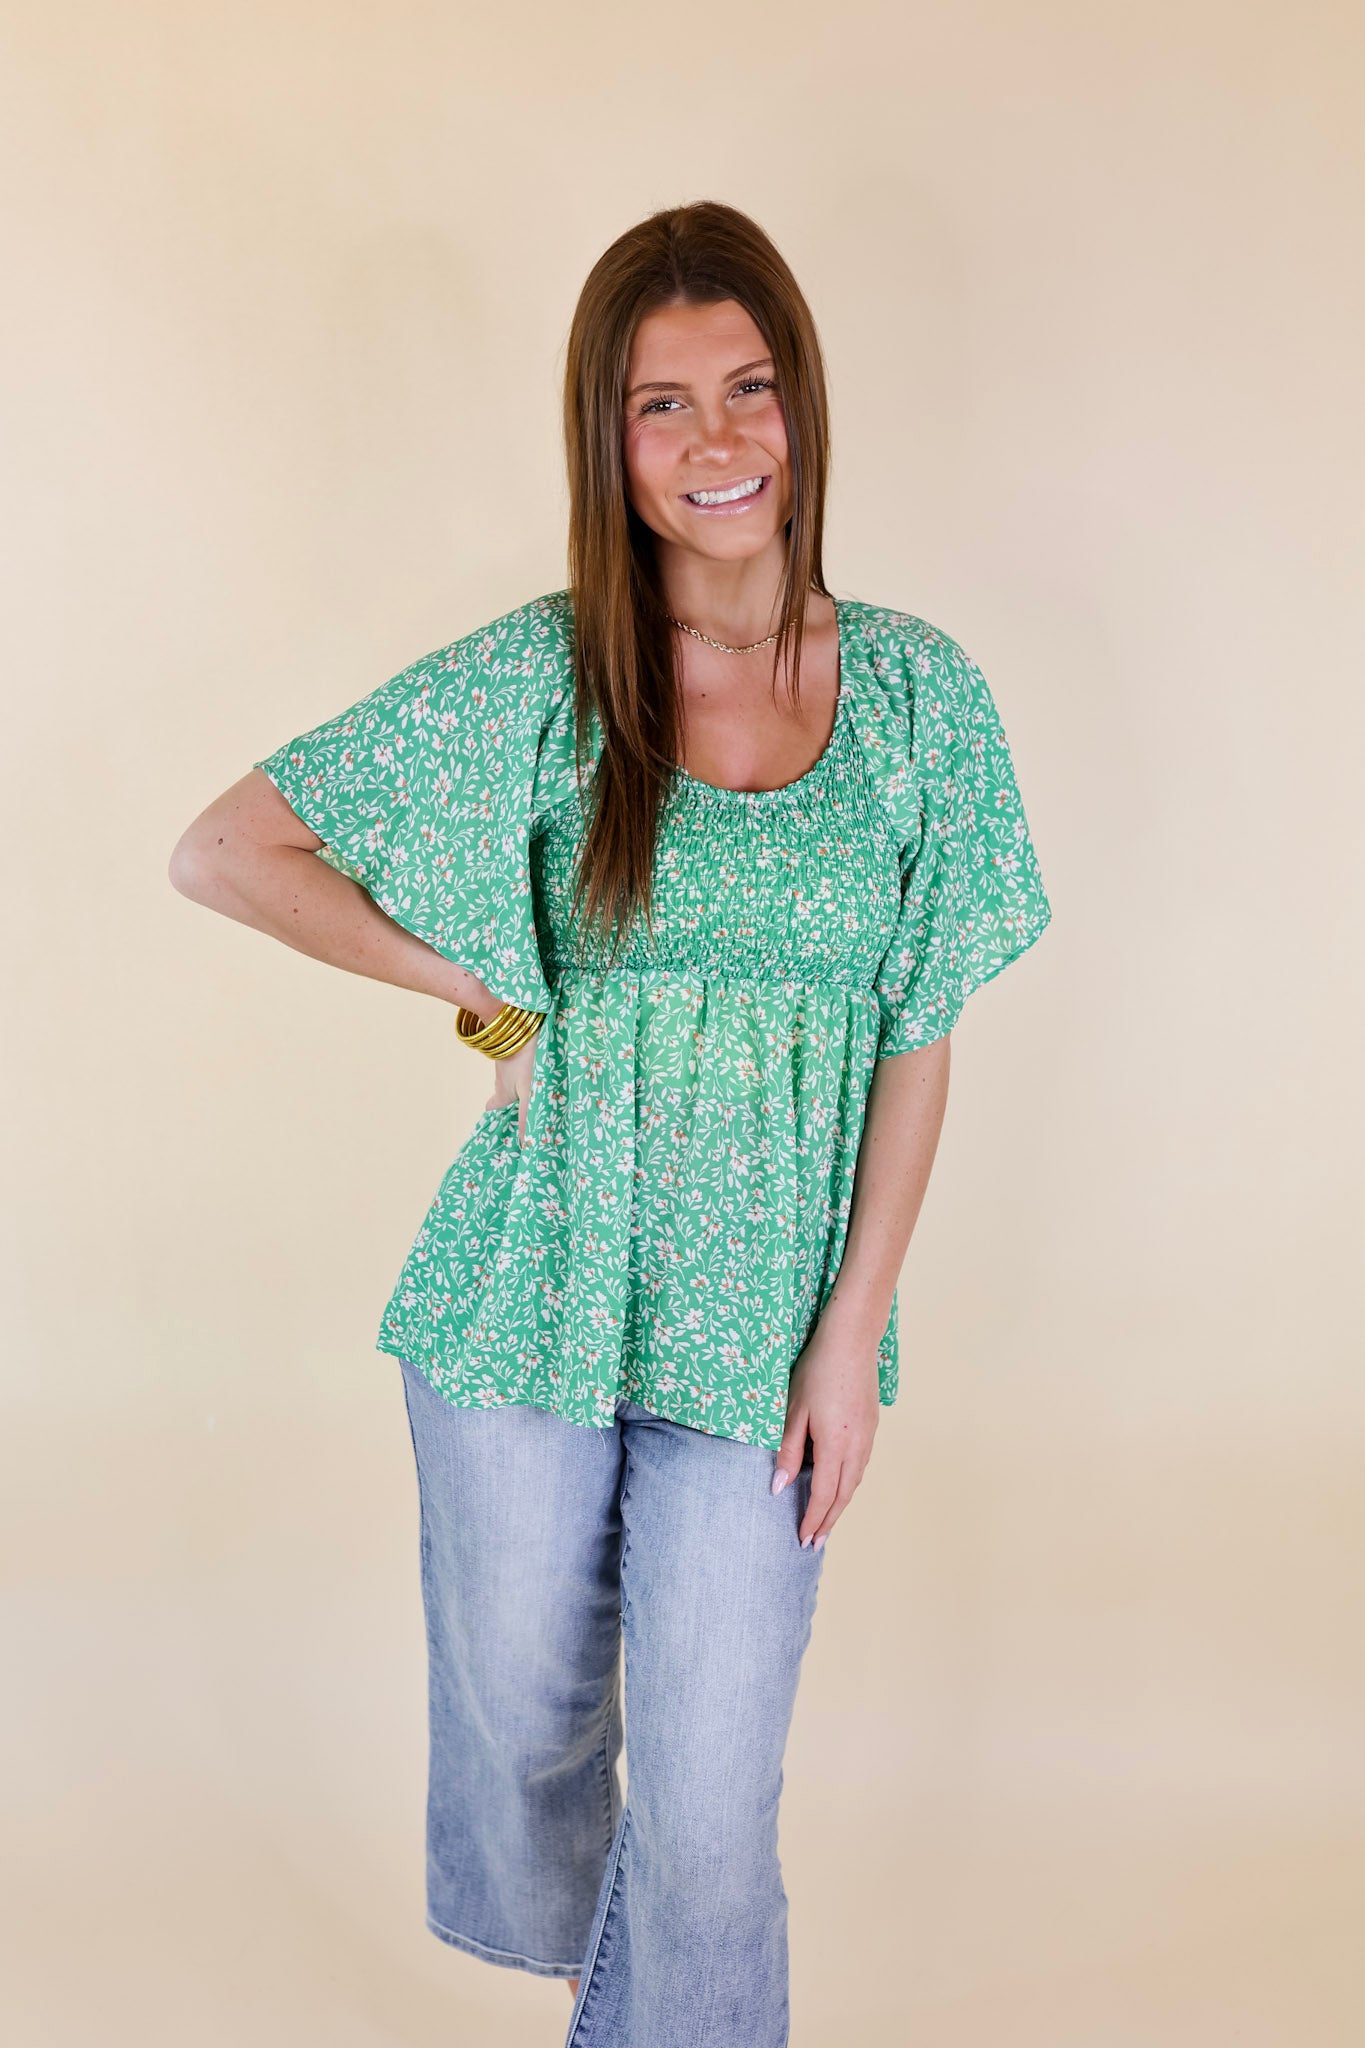 Little Coastal Town Floral Short Sleeve Top with Smocked Bodice in Green - Giddy Up Glamour Boutique